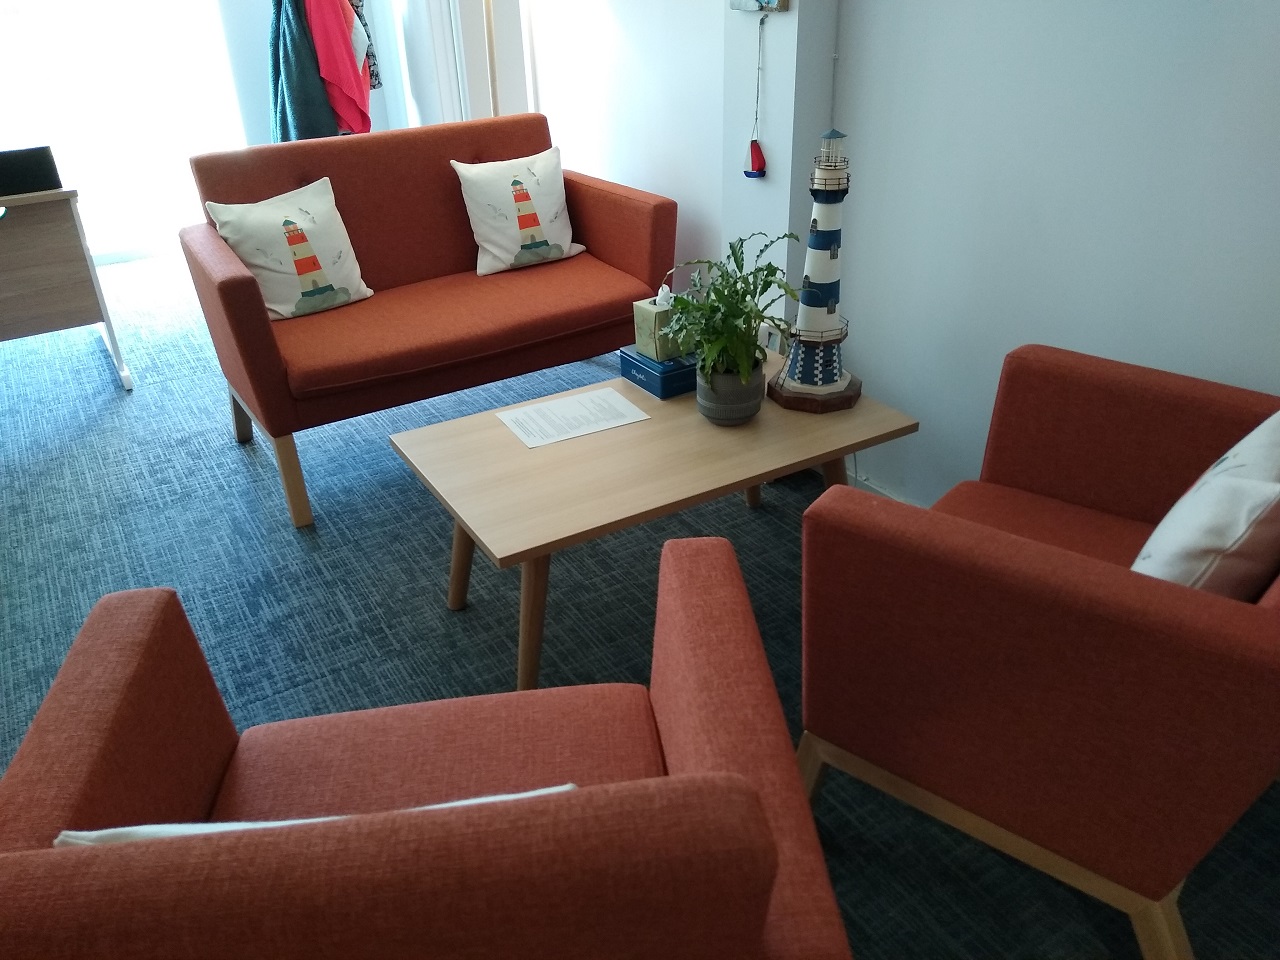 An orange sofa and armchairs, homely furnishings